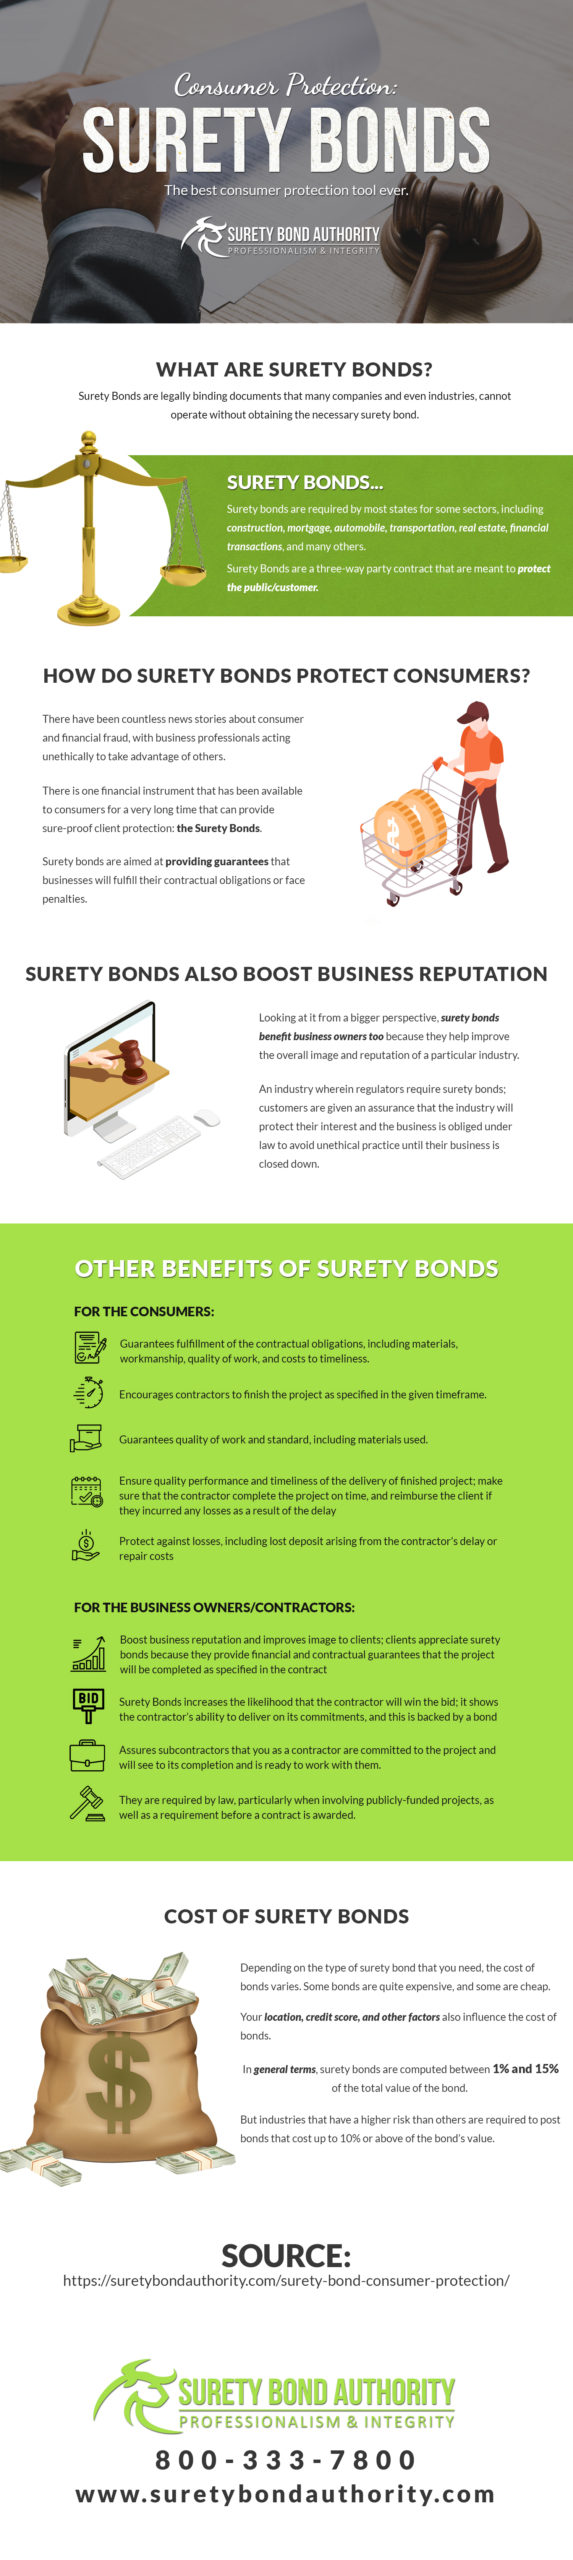 Surety Bonds as Consumer Protection